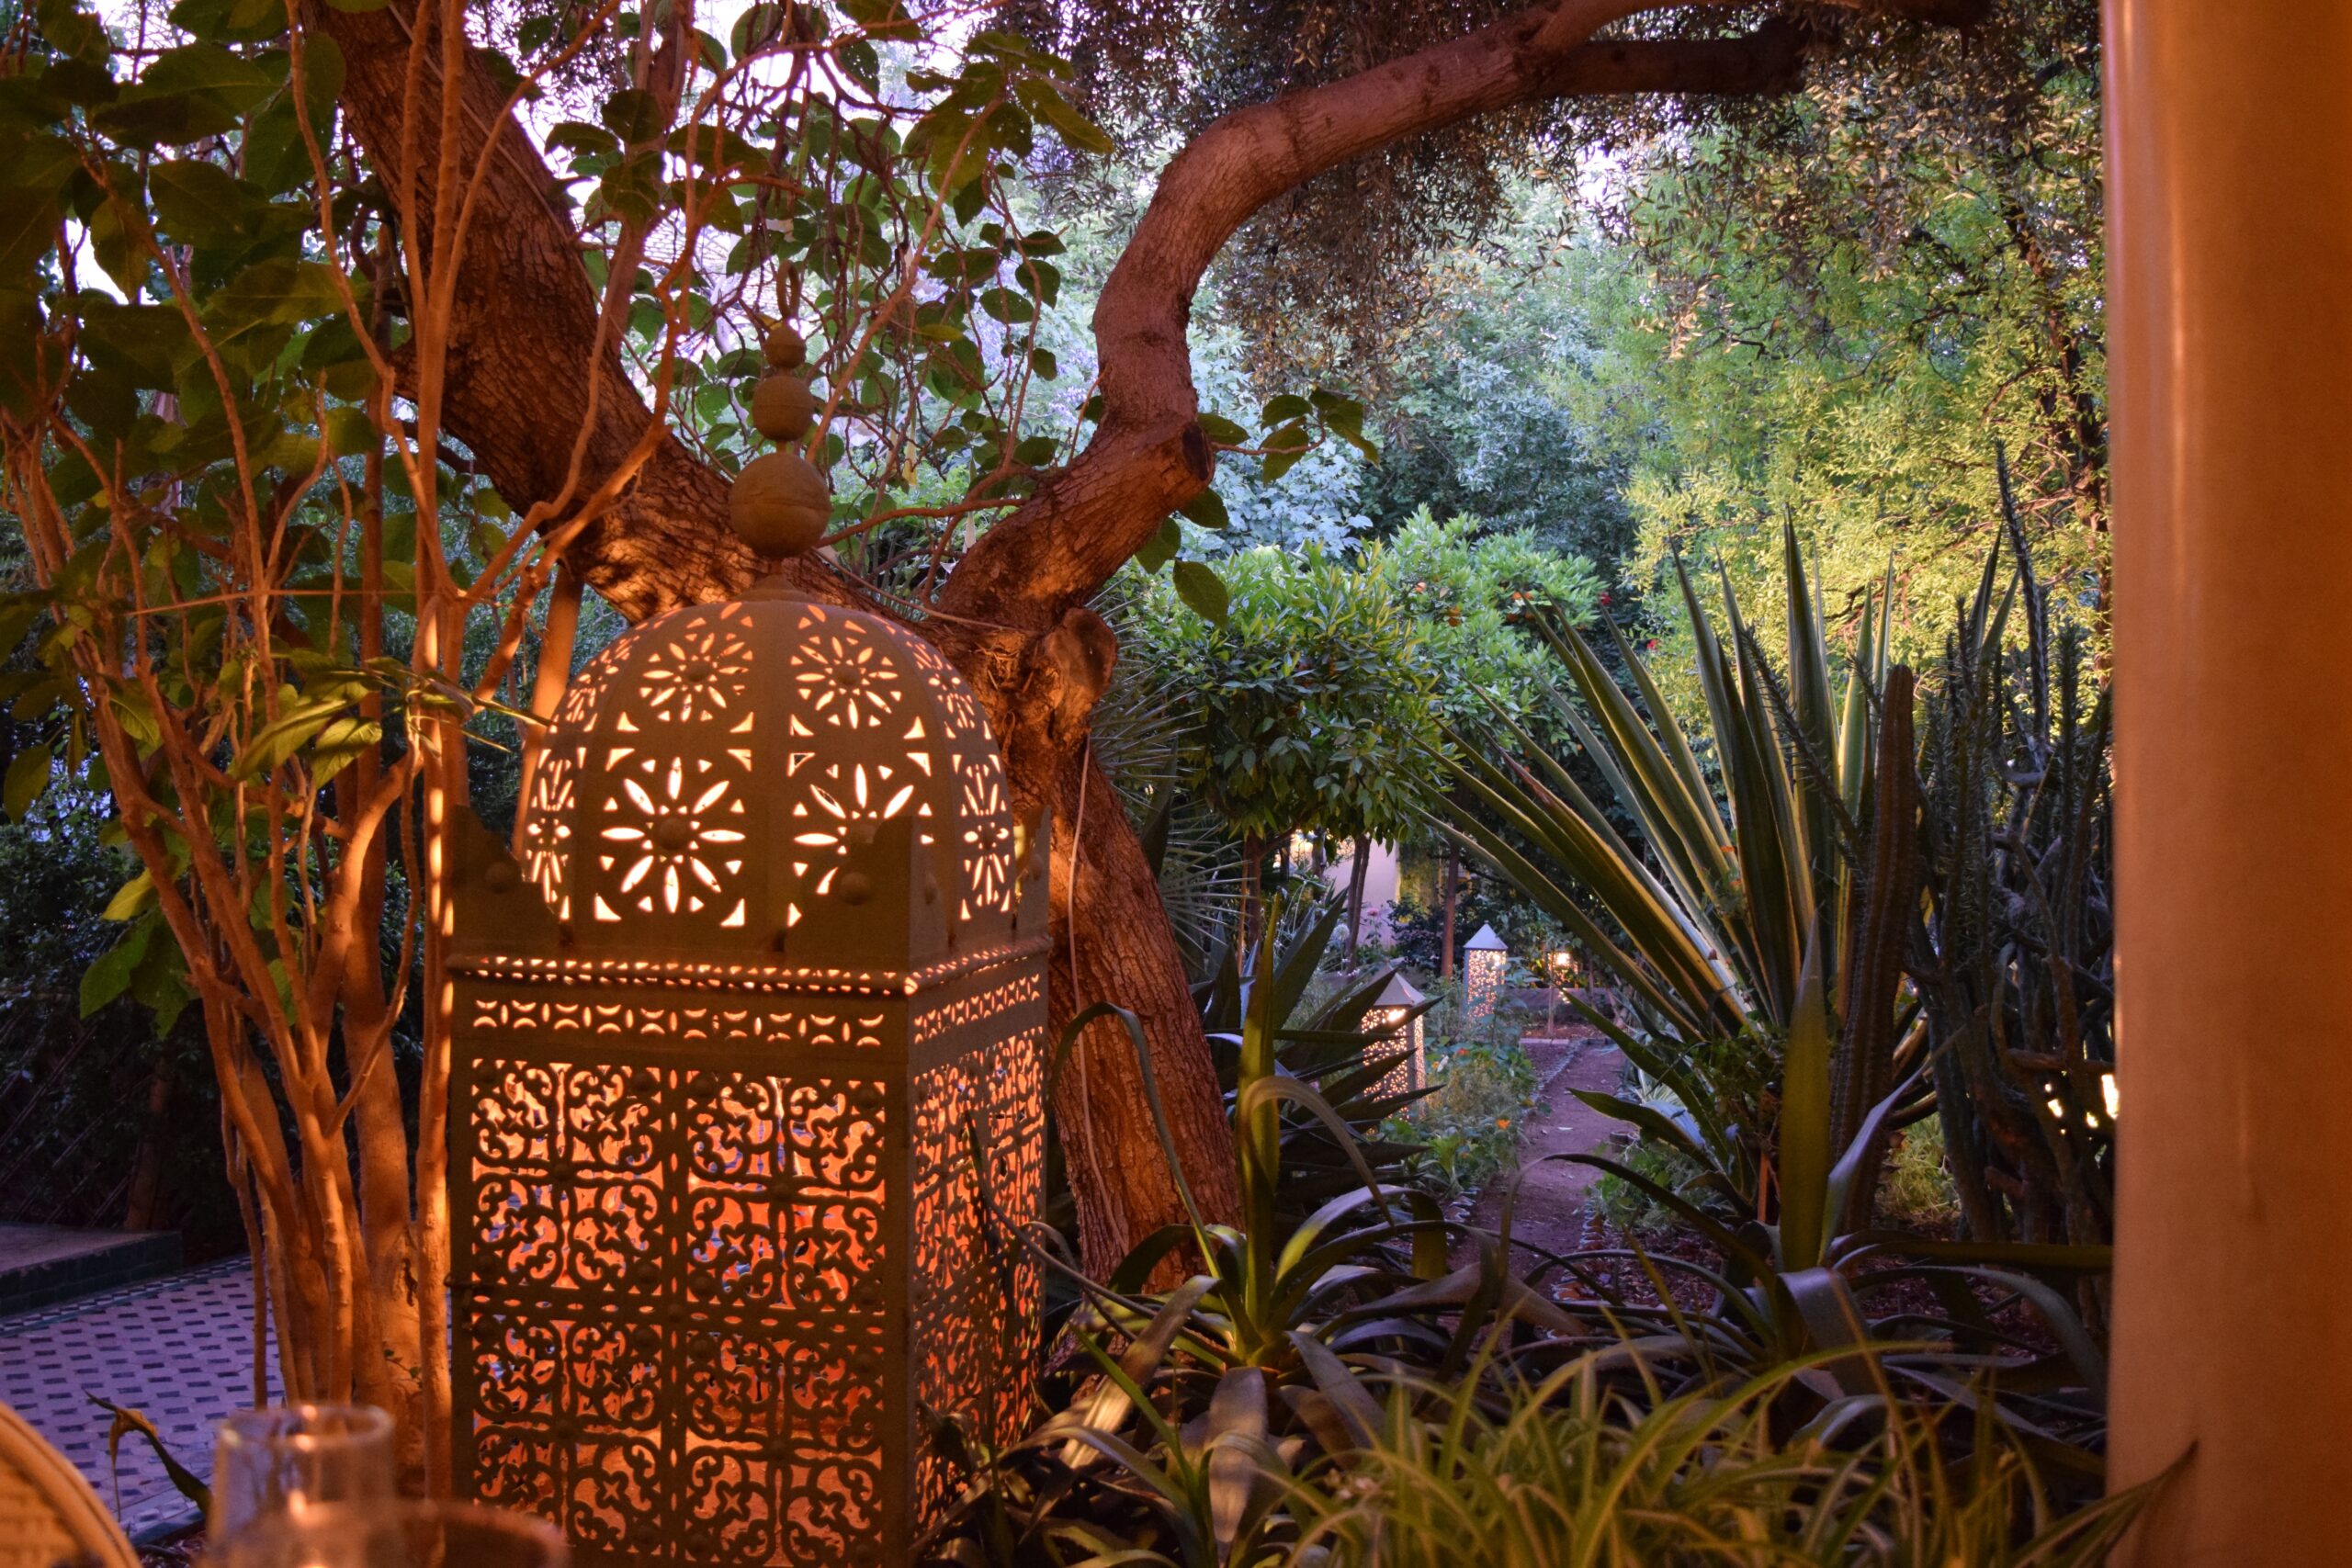 Fez Café Le Jardin des Biehn Dinner Lunch Courtyard Where to Eat in Fes Fez Morocco Food Foodie Best of Morocco garden